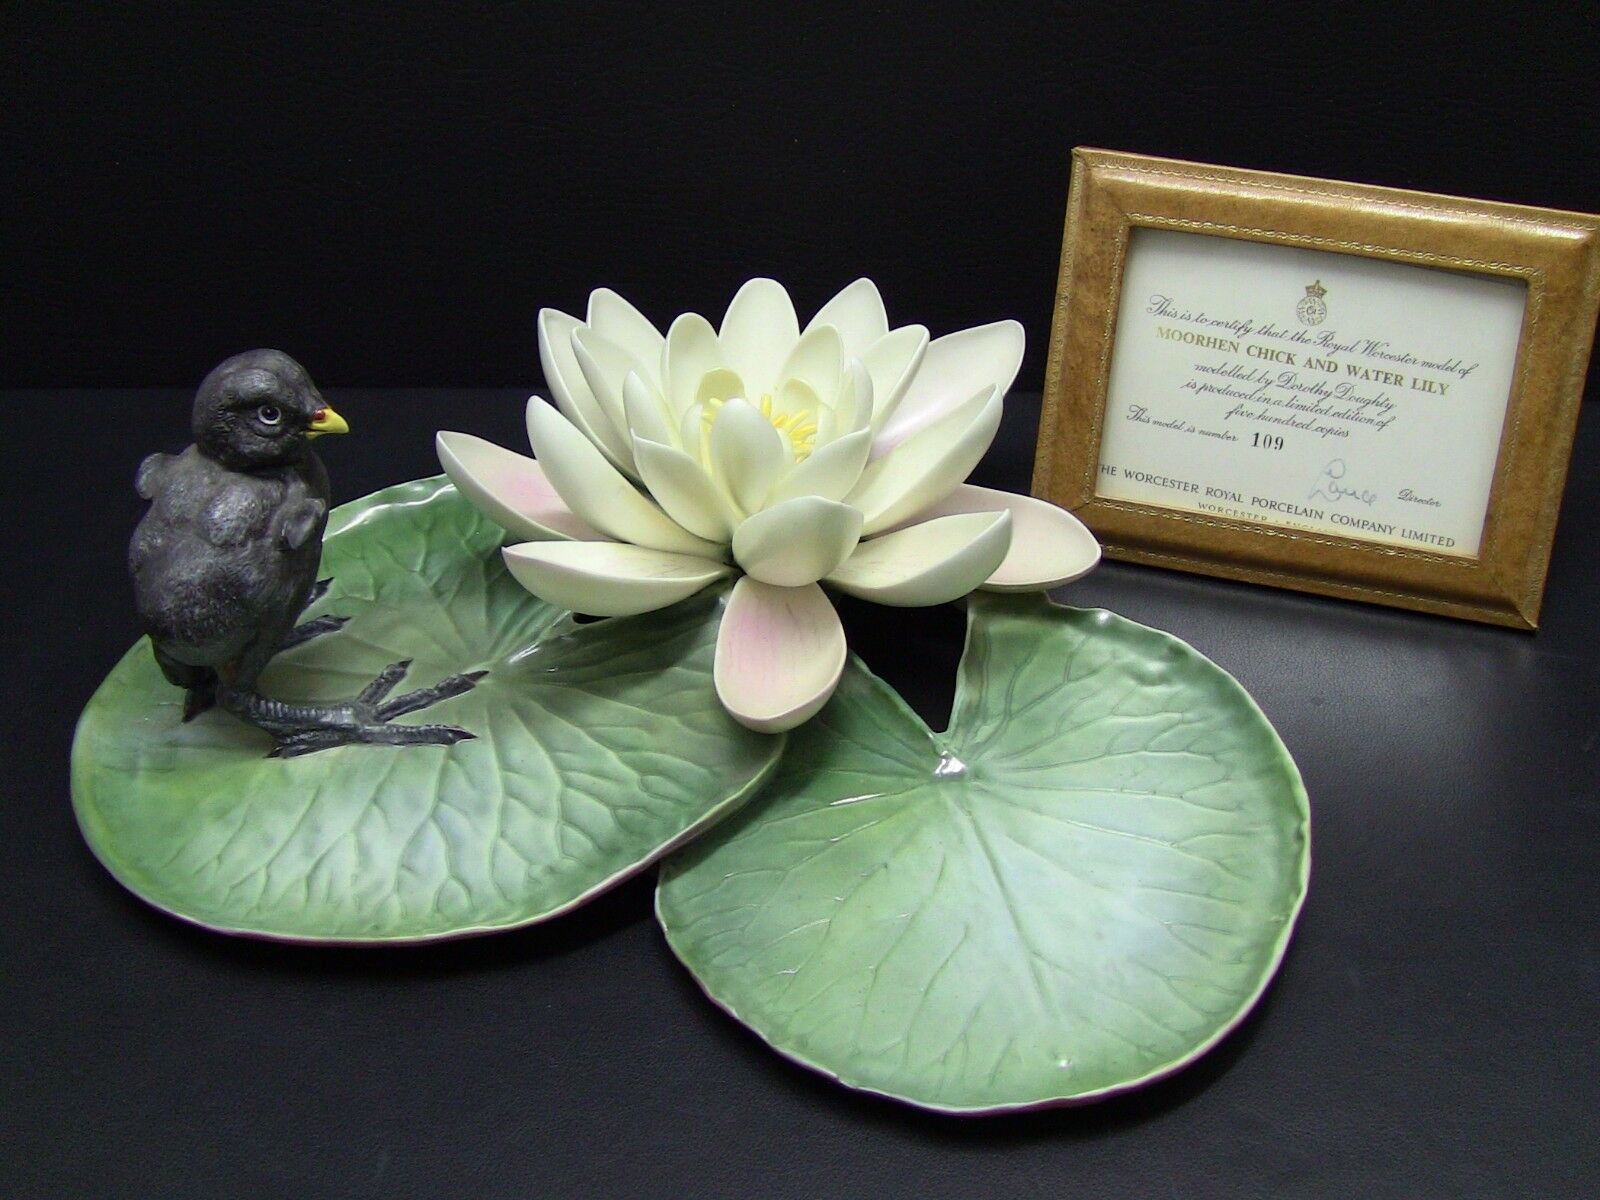 Royal Worcester Dorothy Doughty MOORHEN CHICK & WATER LILY Porcelain Figurine